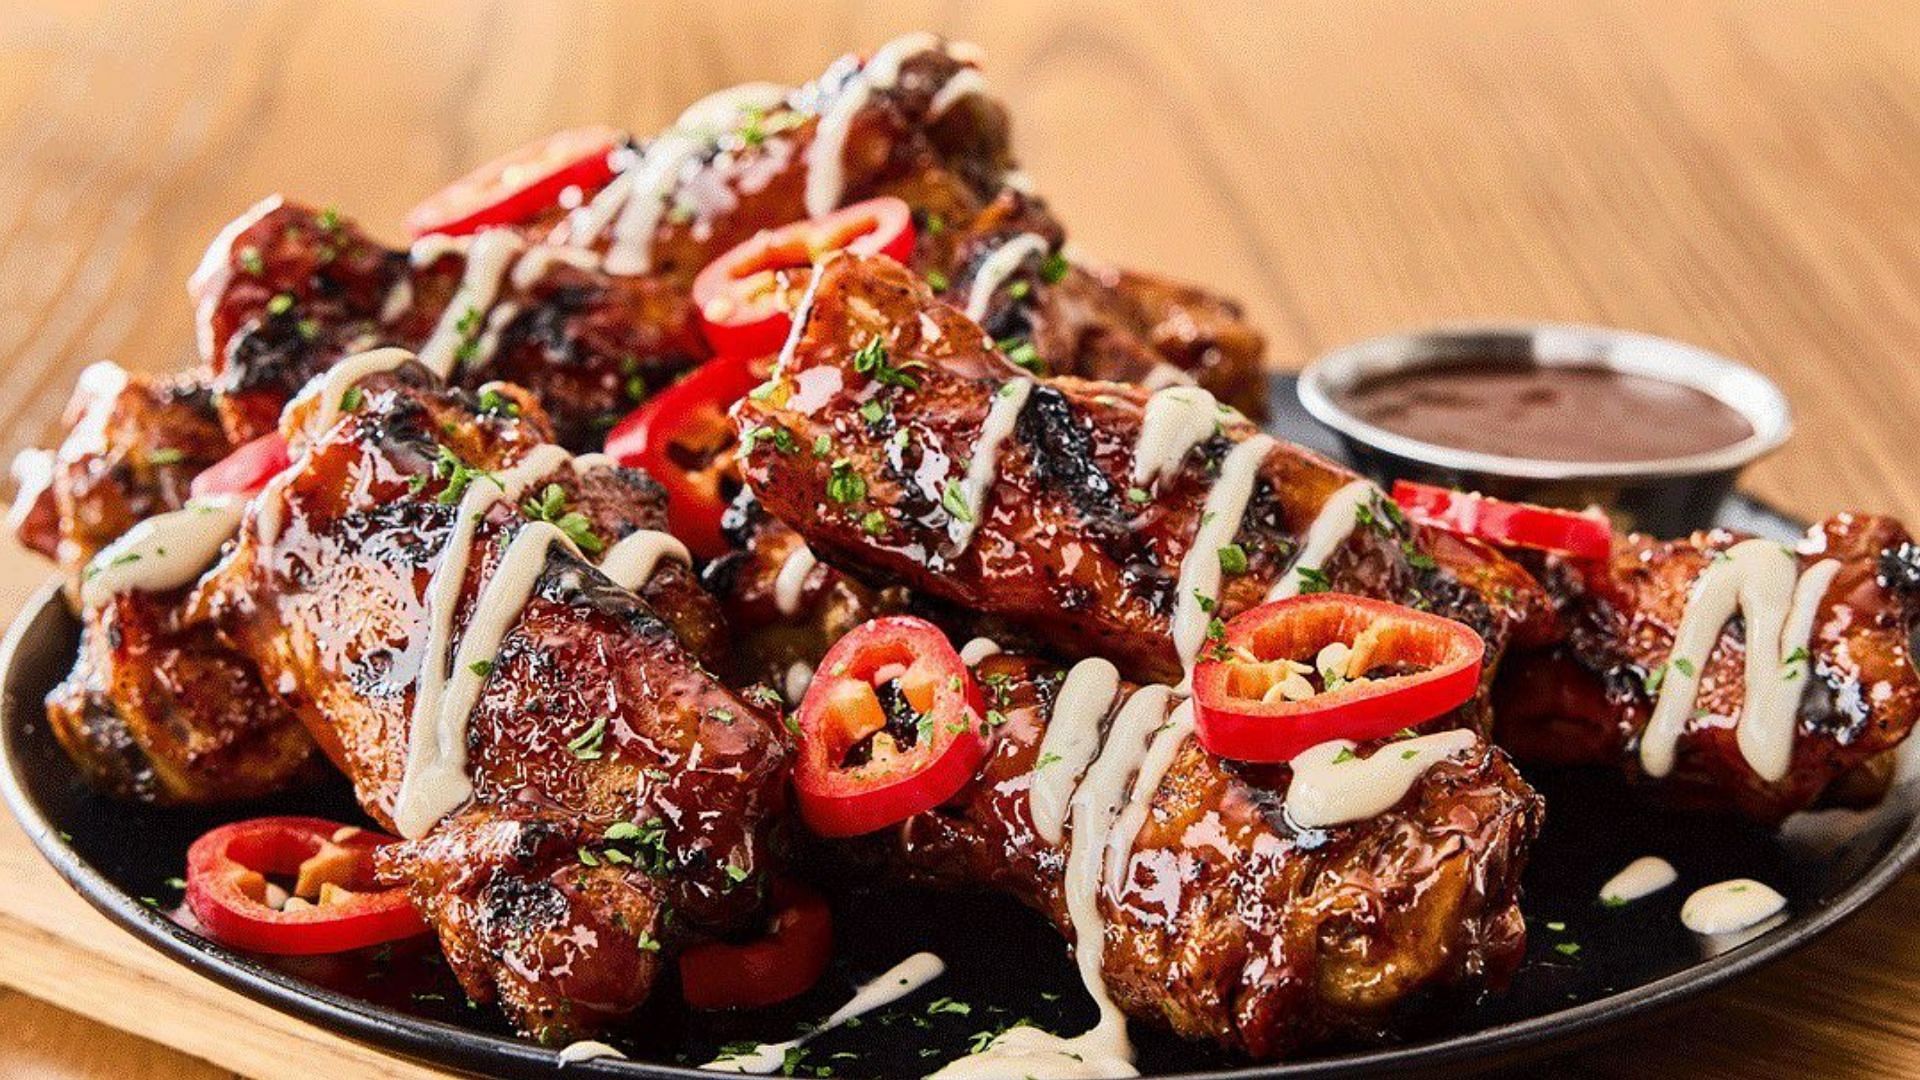 The Aussie Chook Ribs (Image via Outback Steakhouse)